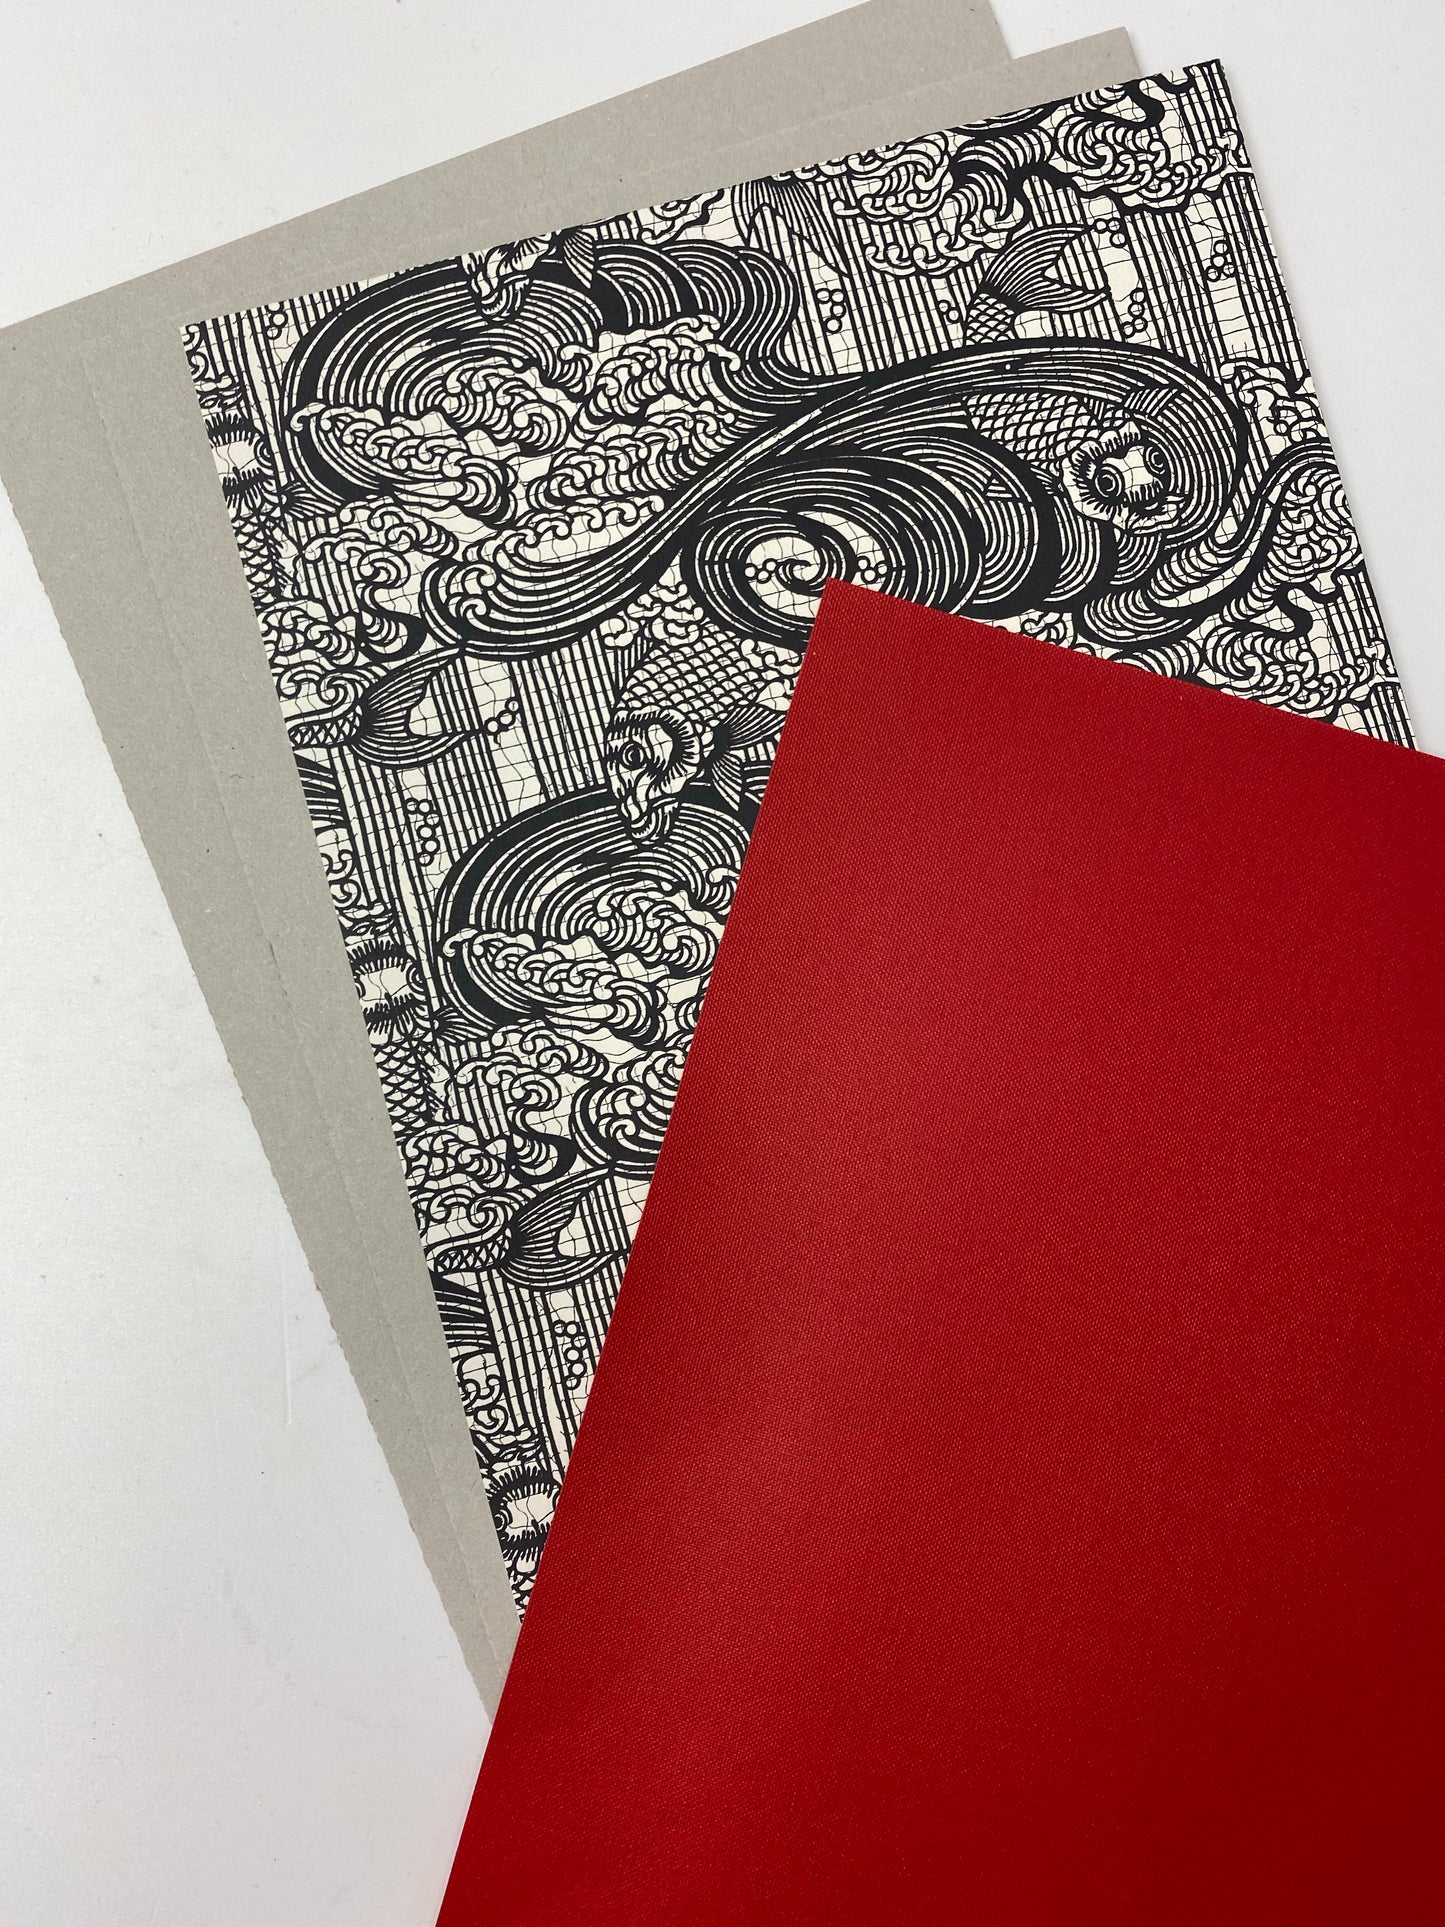 Refill Pack - Bookcloth, GreyBoard + End papers